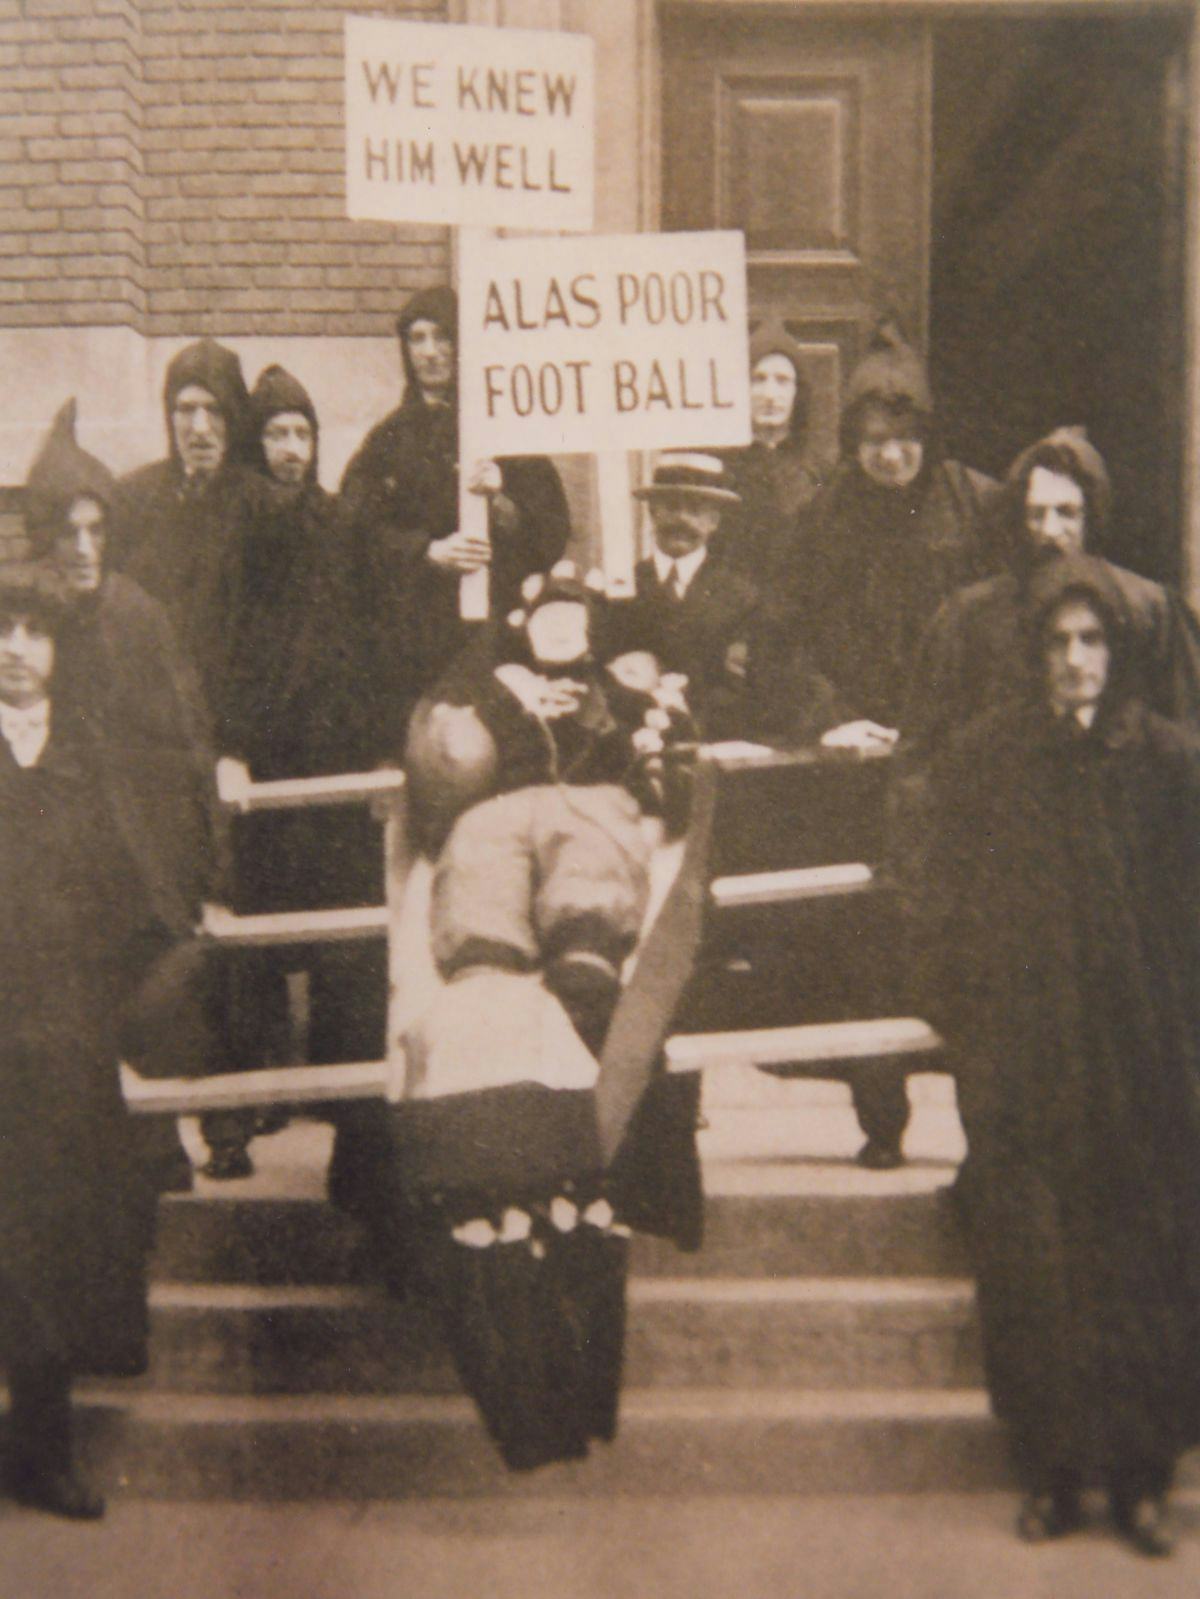 Photo from 1926 of Stevens student carrying a dummy of a deceased football player and signs saying "Alas poor foot ball."